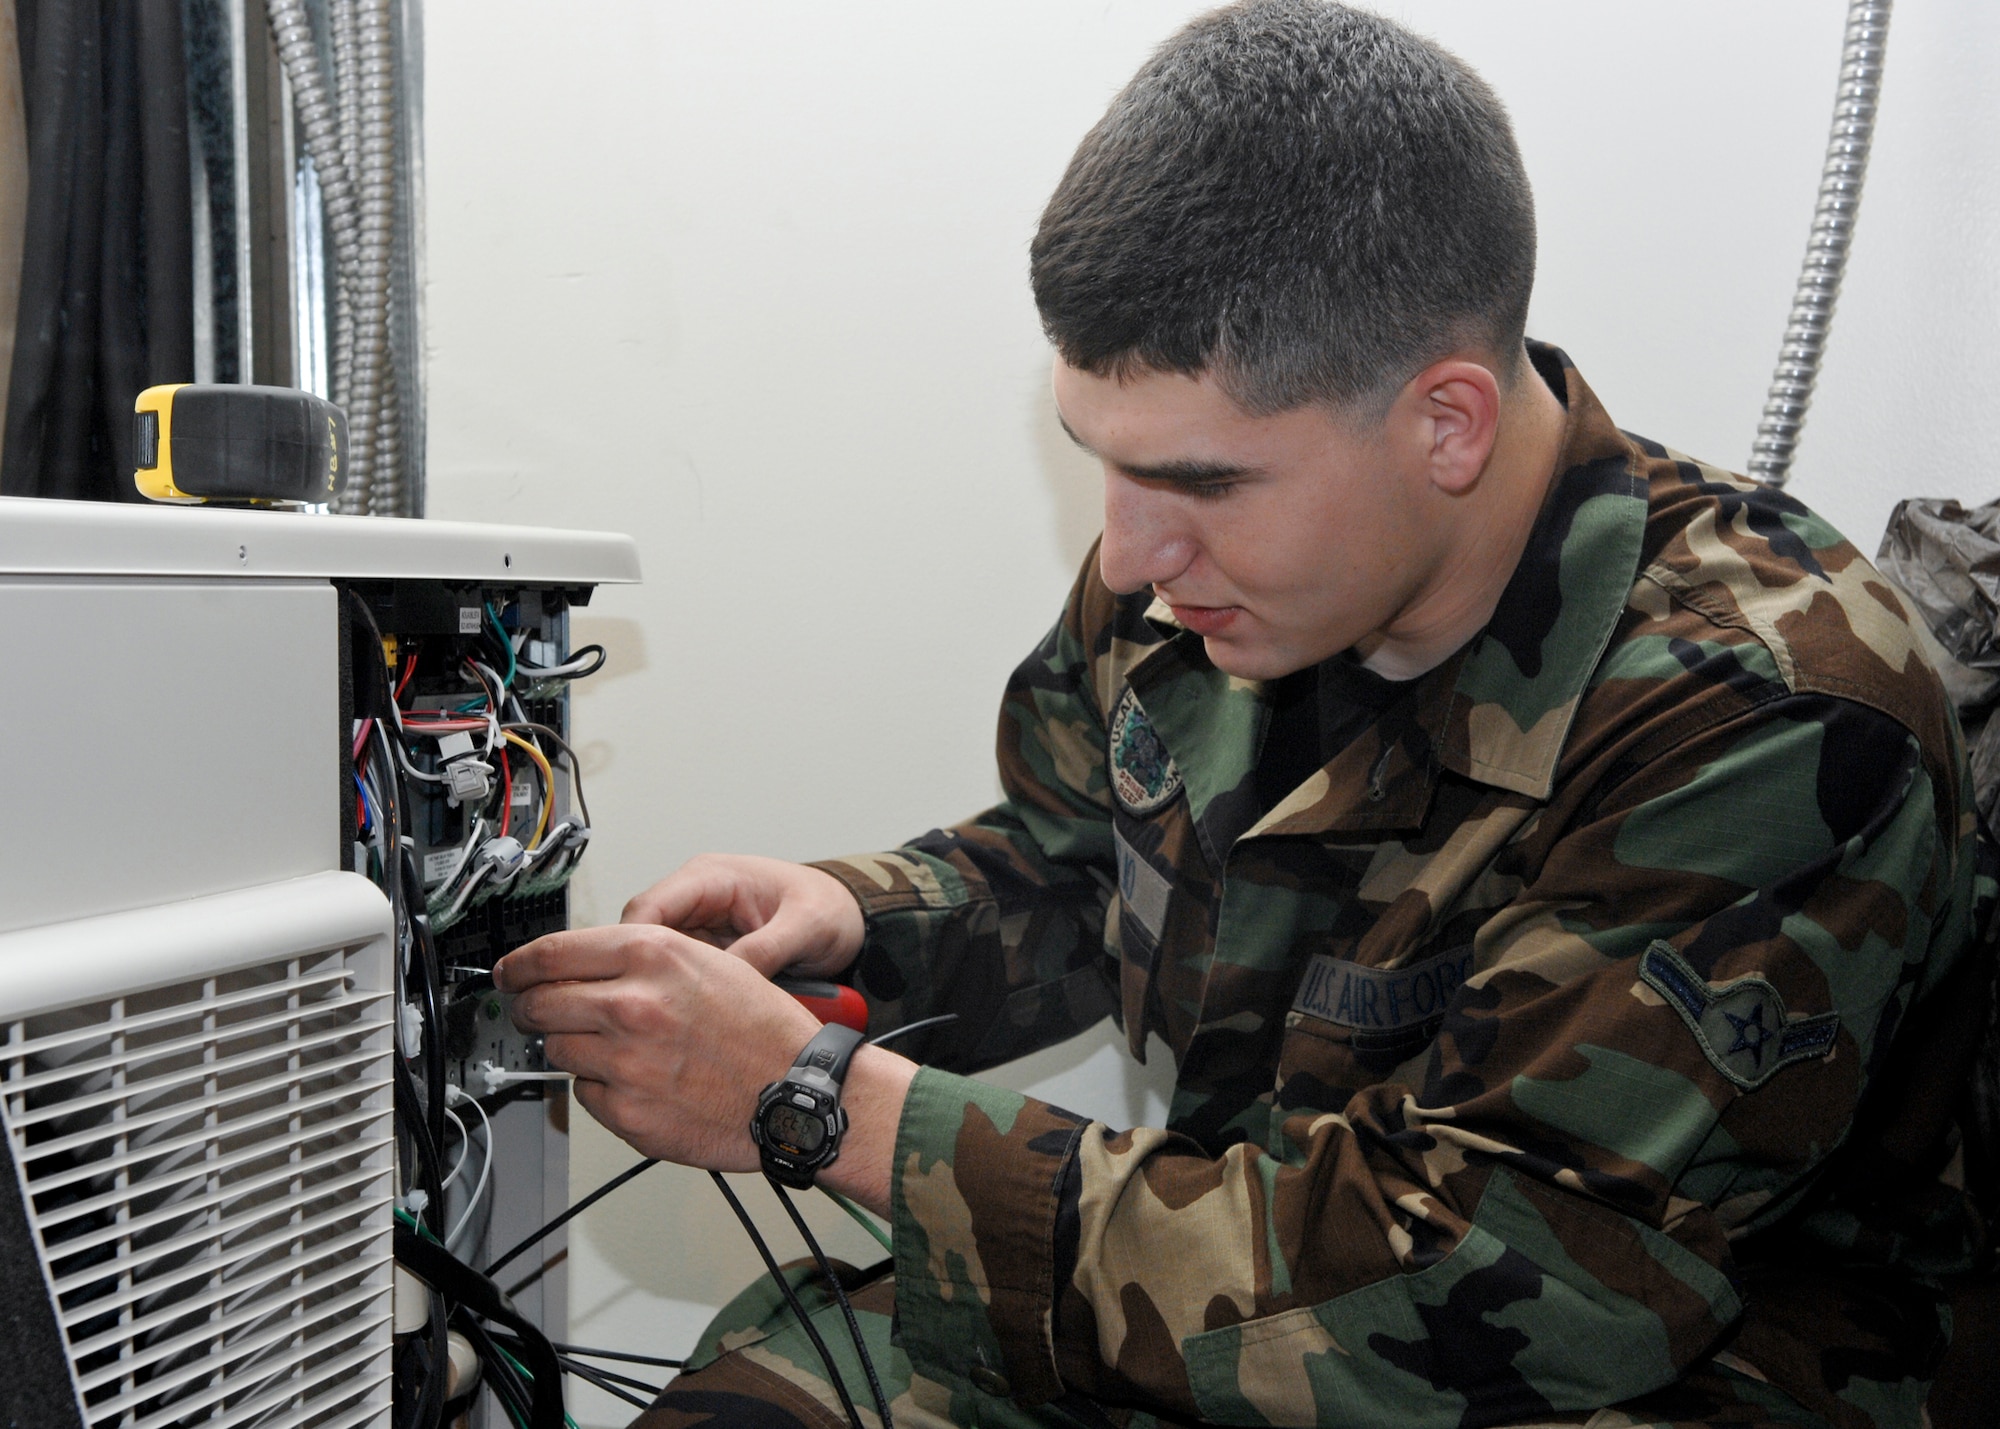 ELMENDORF AIR FORCE BASE, Alaska -- Airman Richard Giglio works on an air conditioning while installing a split system air conditioning unit. The split system air conditioning unit is one of the many units used on base to aid the mission. Giglio is a member of the 3rd Civil Engineer Squadron. (U.S. Air Force photo/Airman Jack Sanders)